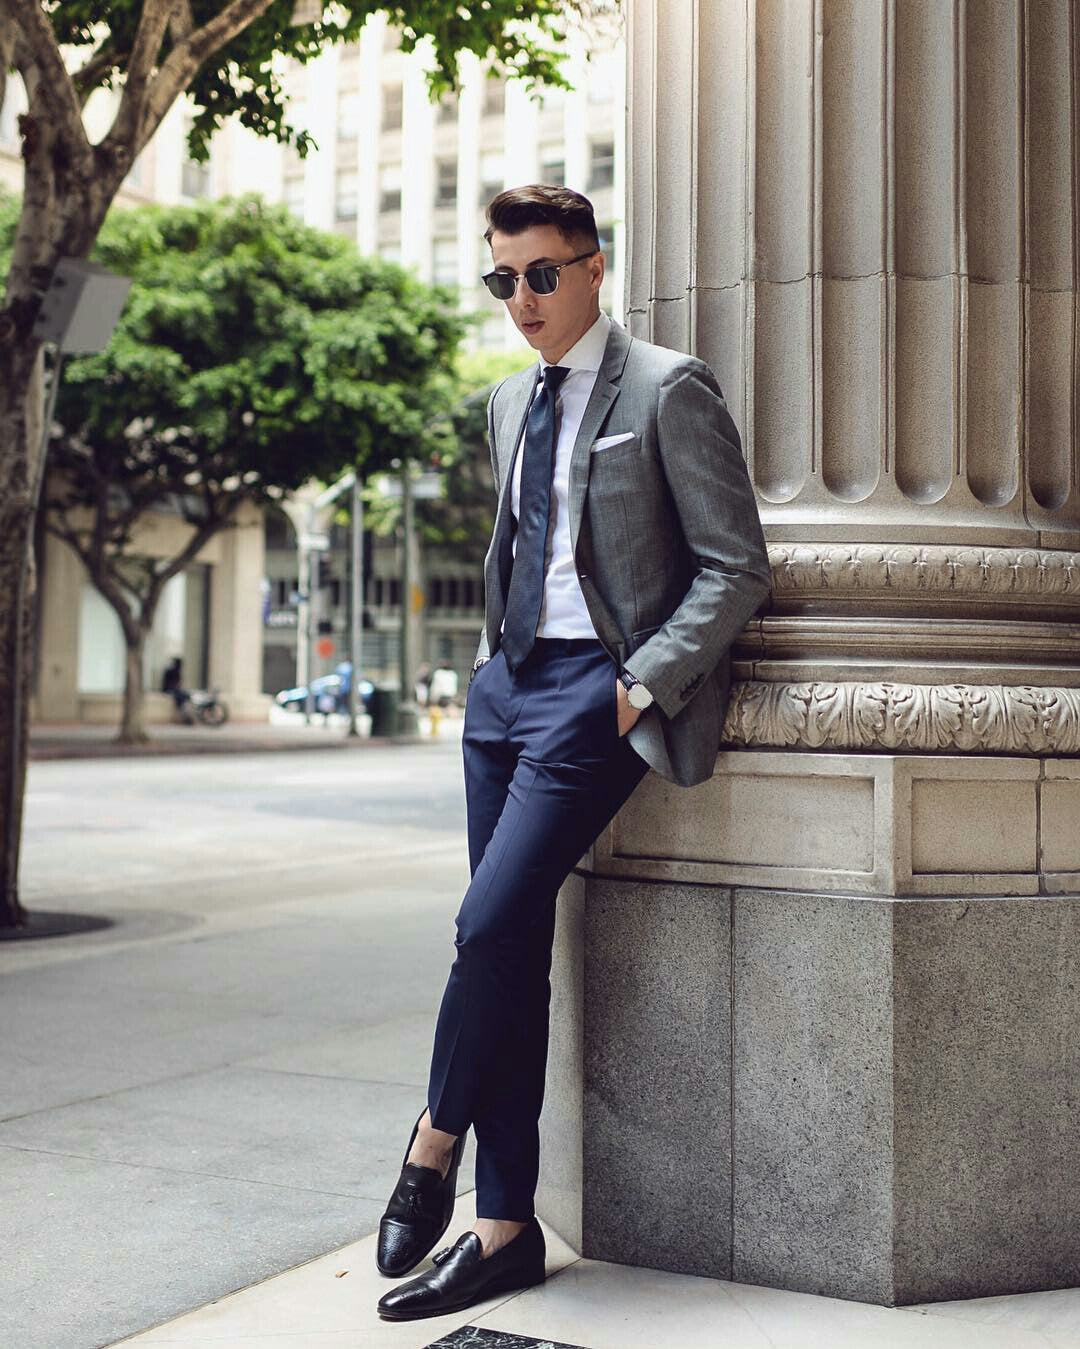 8 Elegant & Sharp Street Style Looks To Steal From This #Menswear Influencer